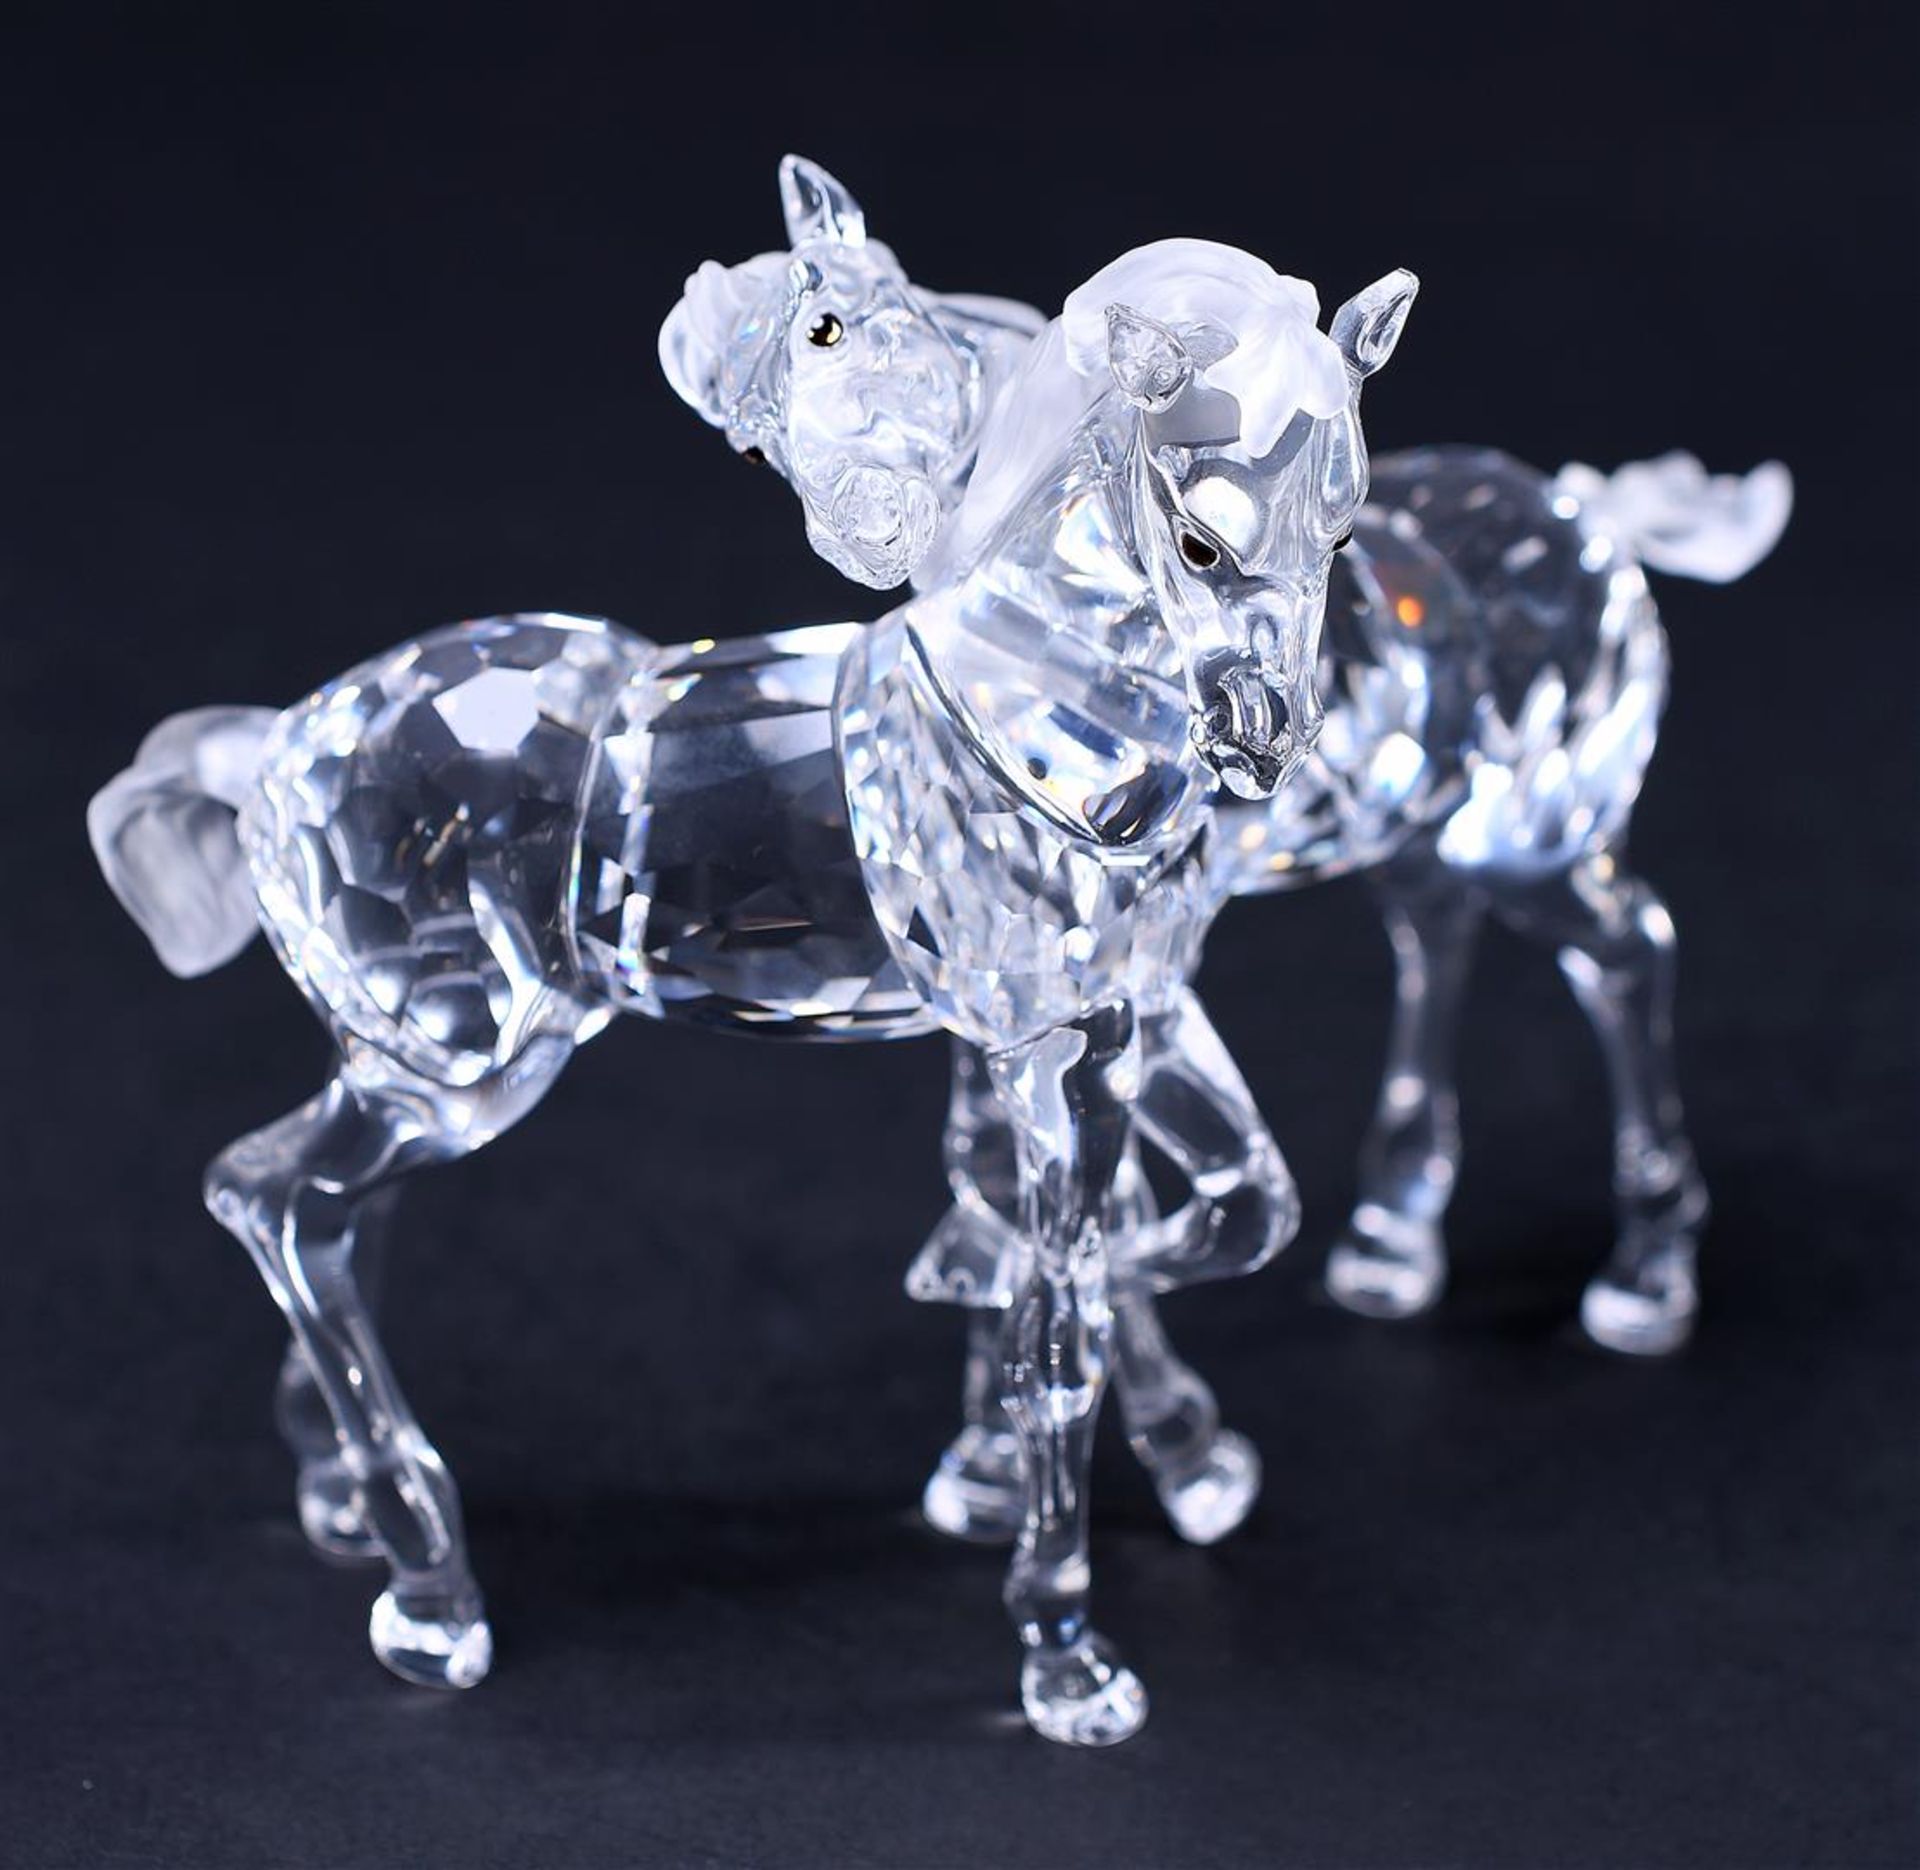 Swarovski, Foals, Year of issue 2003, 627637. Includes original box.
11,9 x 9,2 cm. - Image 4 of 5